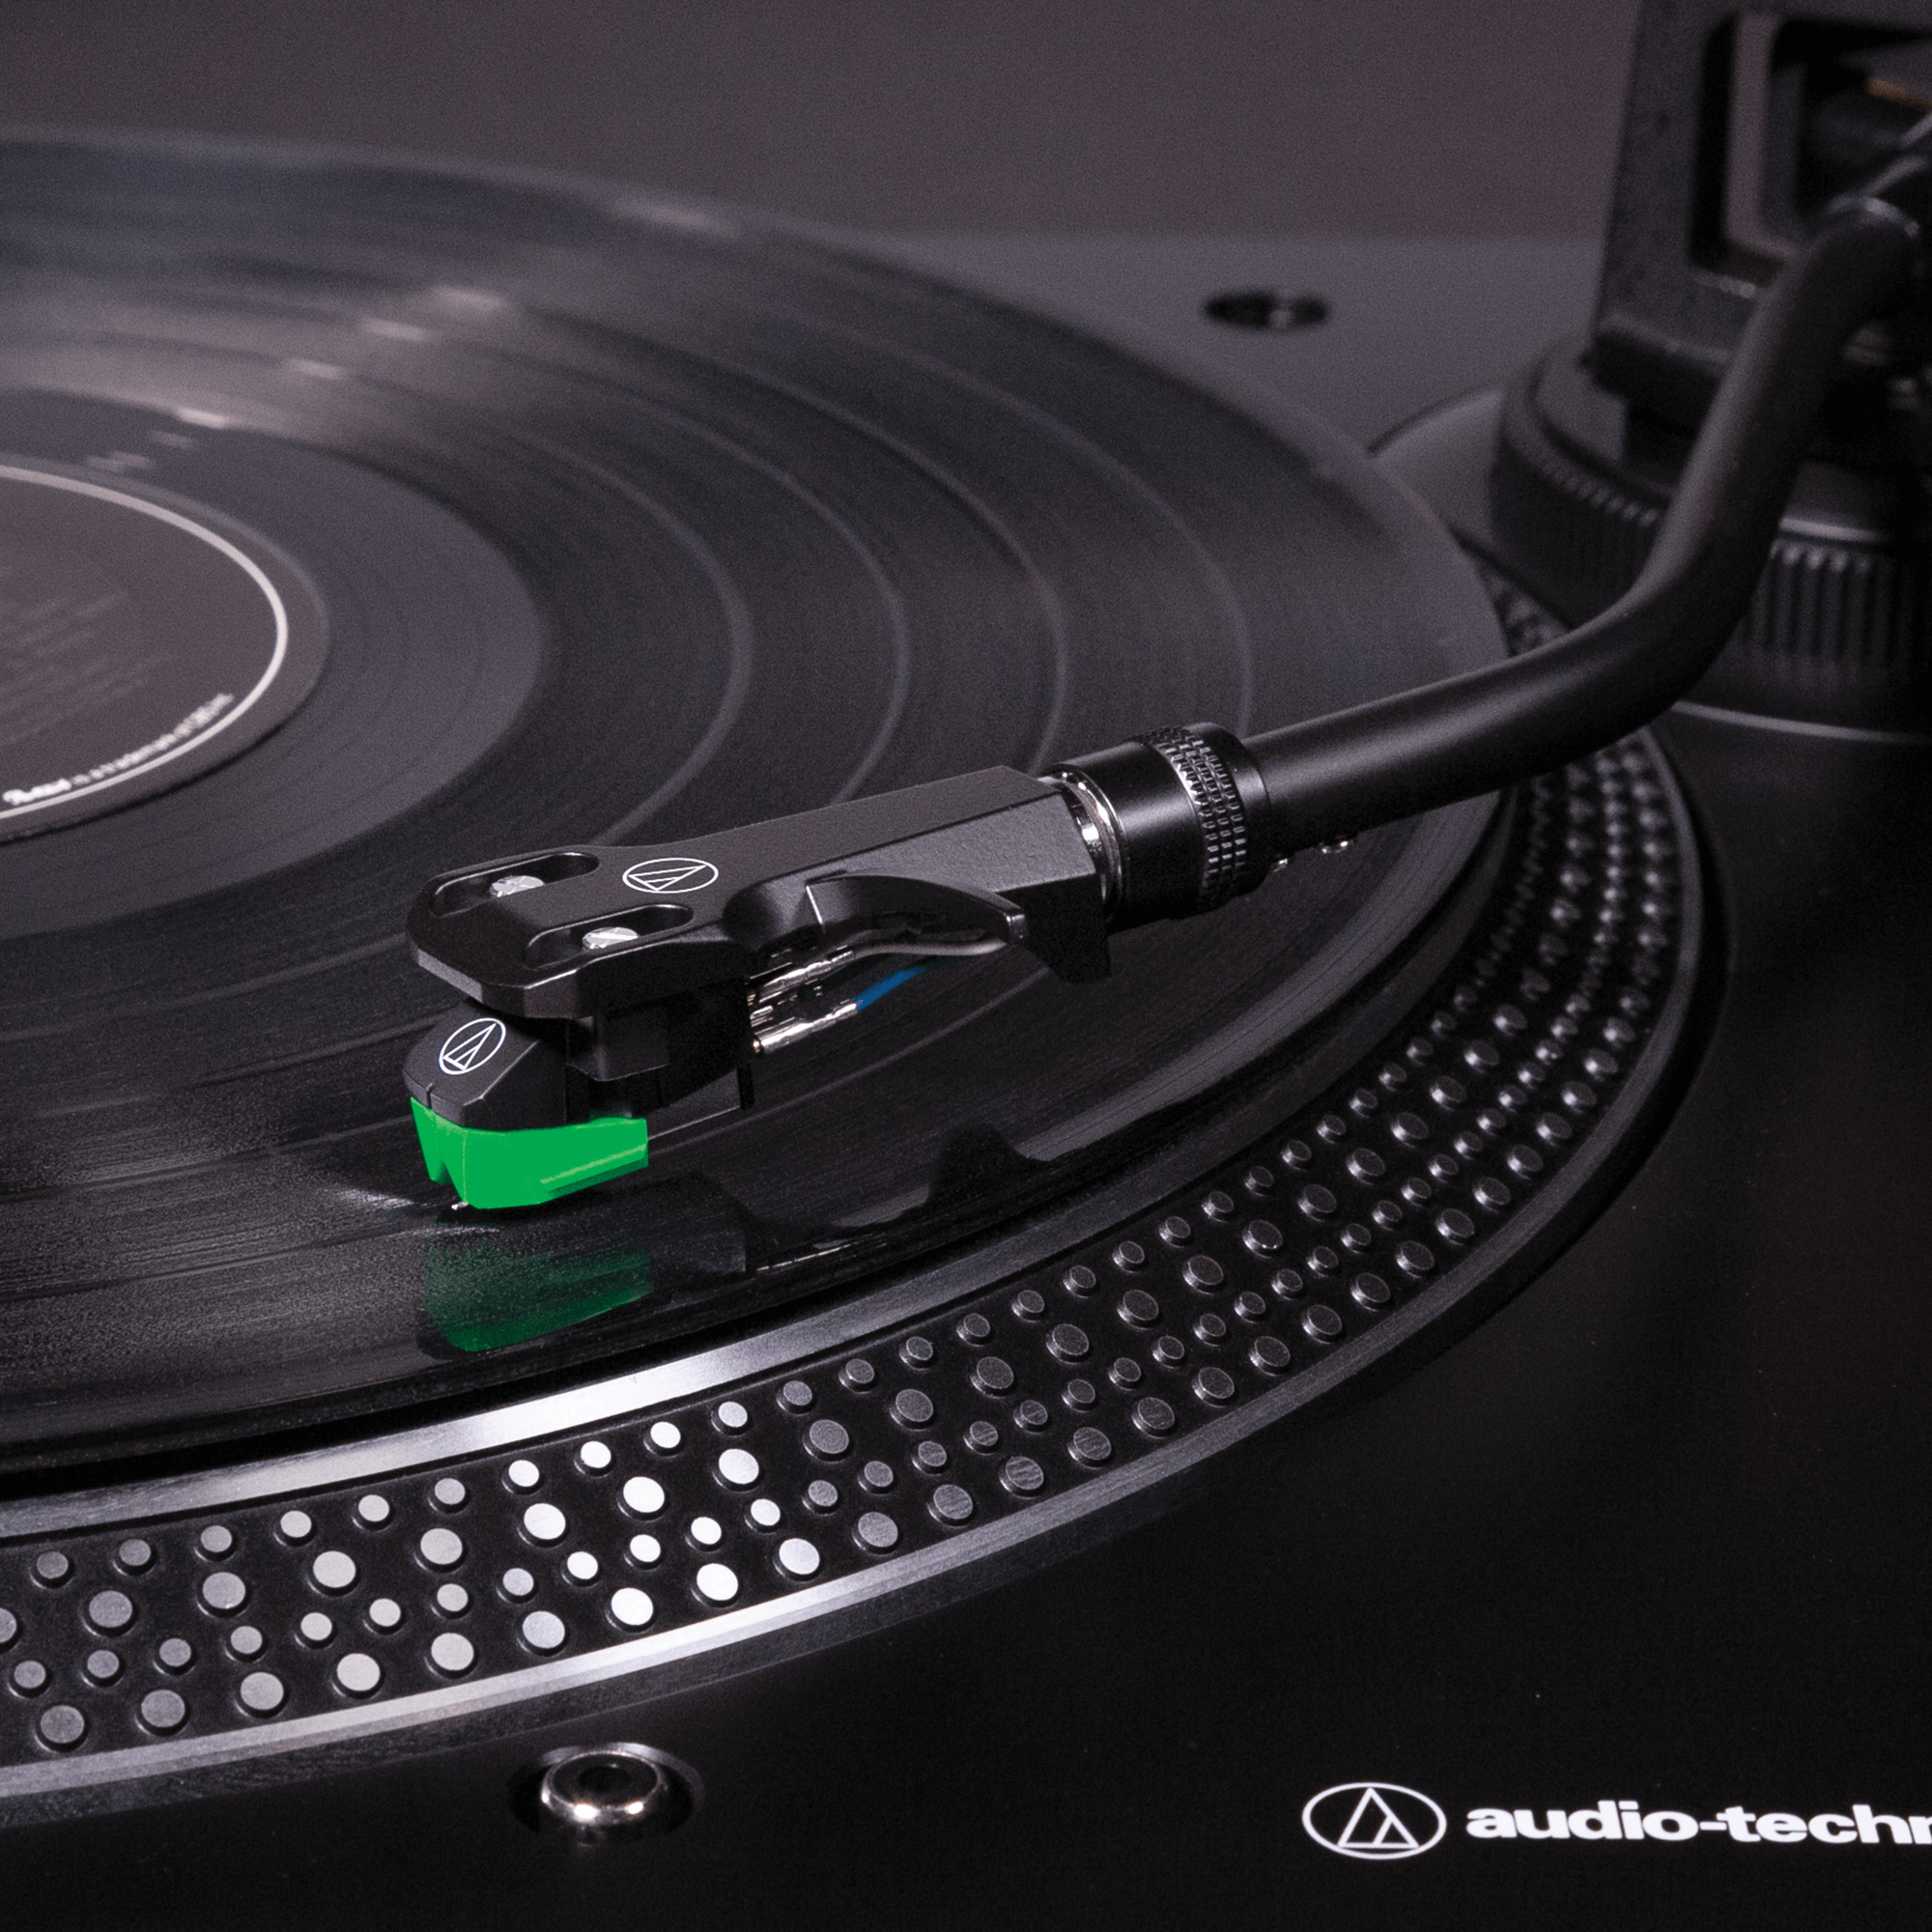 AT-LP120XBT-USB Direct Drive Turntable